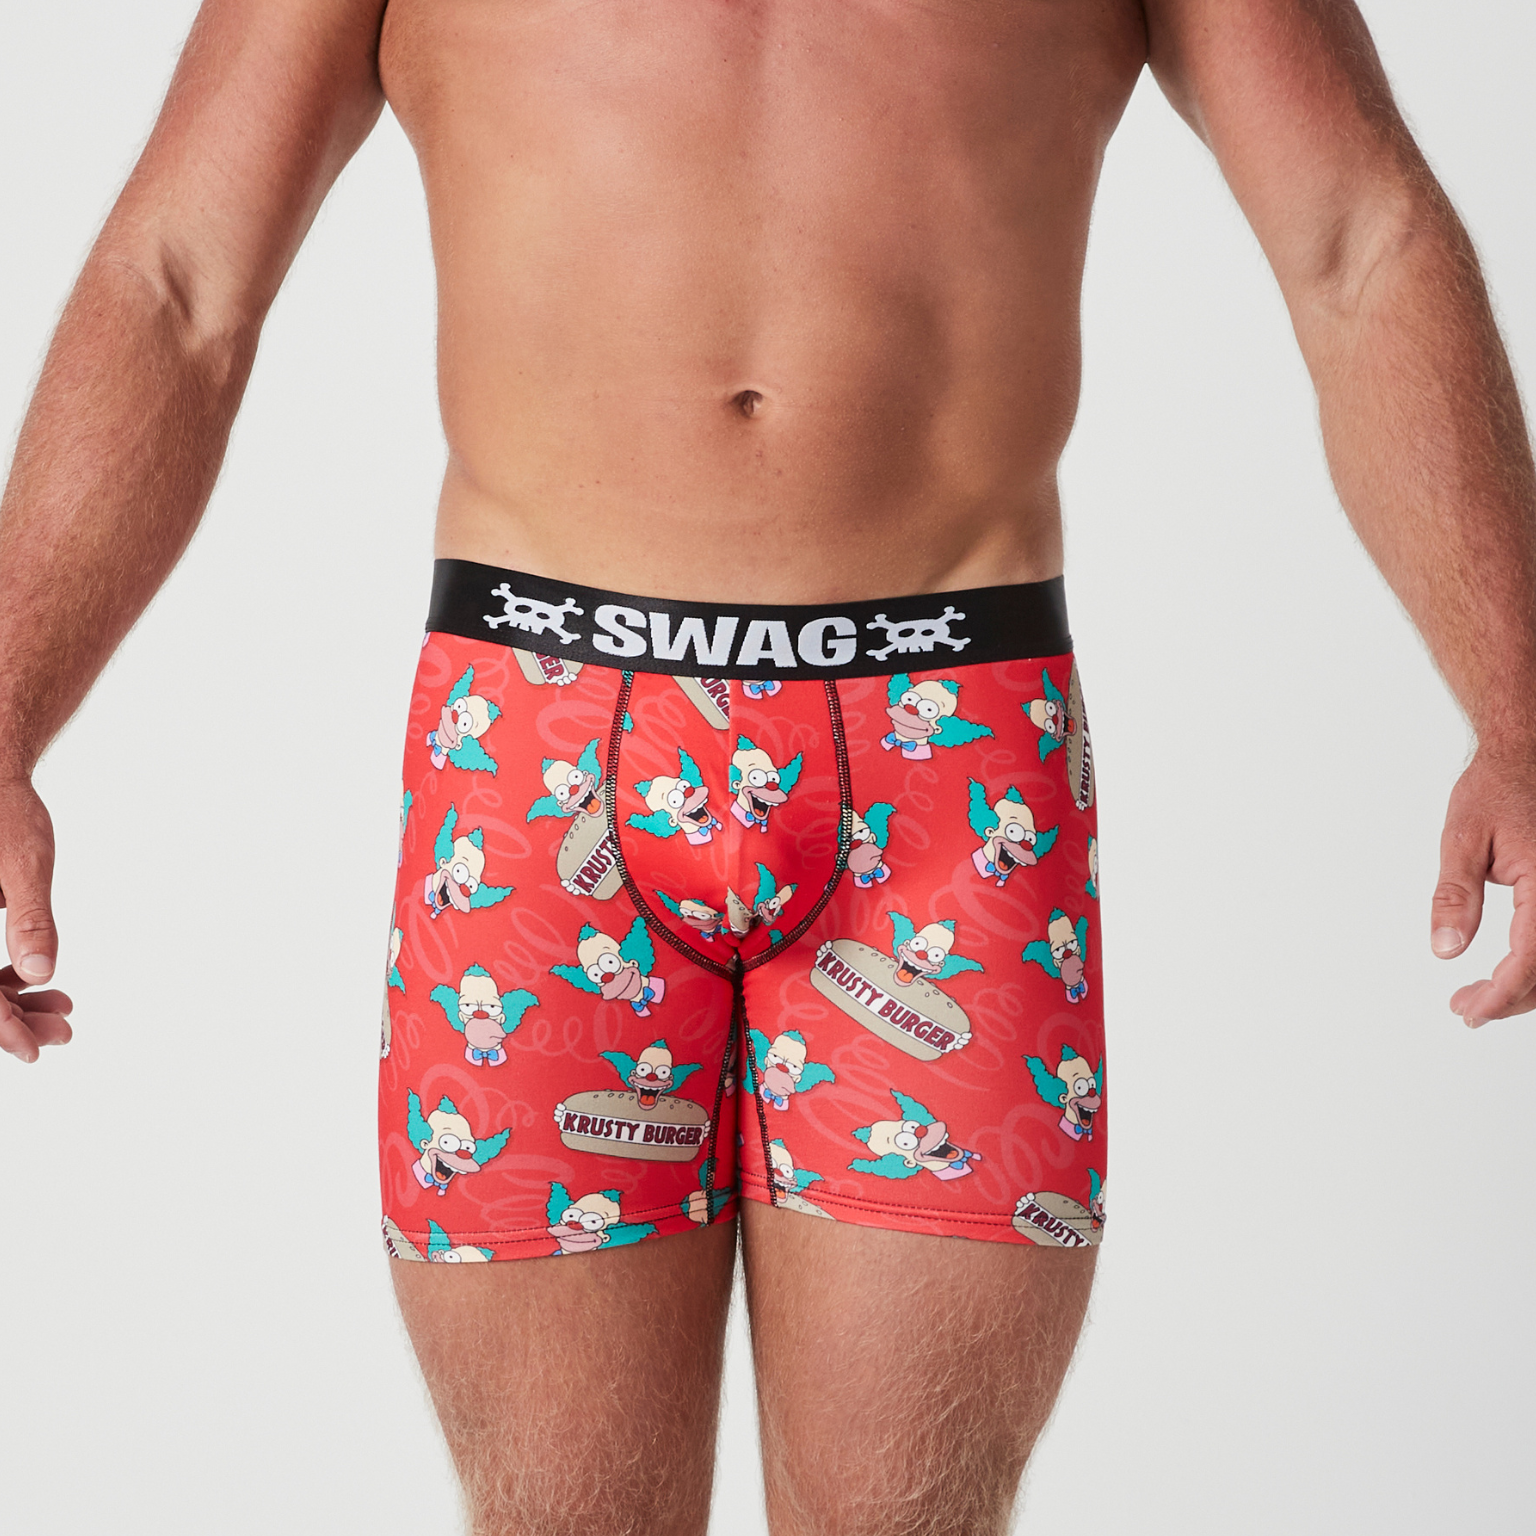 Boxer Brief Underwear with a Separate Elephant Trunk and Low-Rise Cut –  Modern Undies